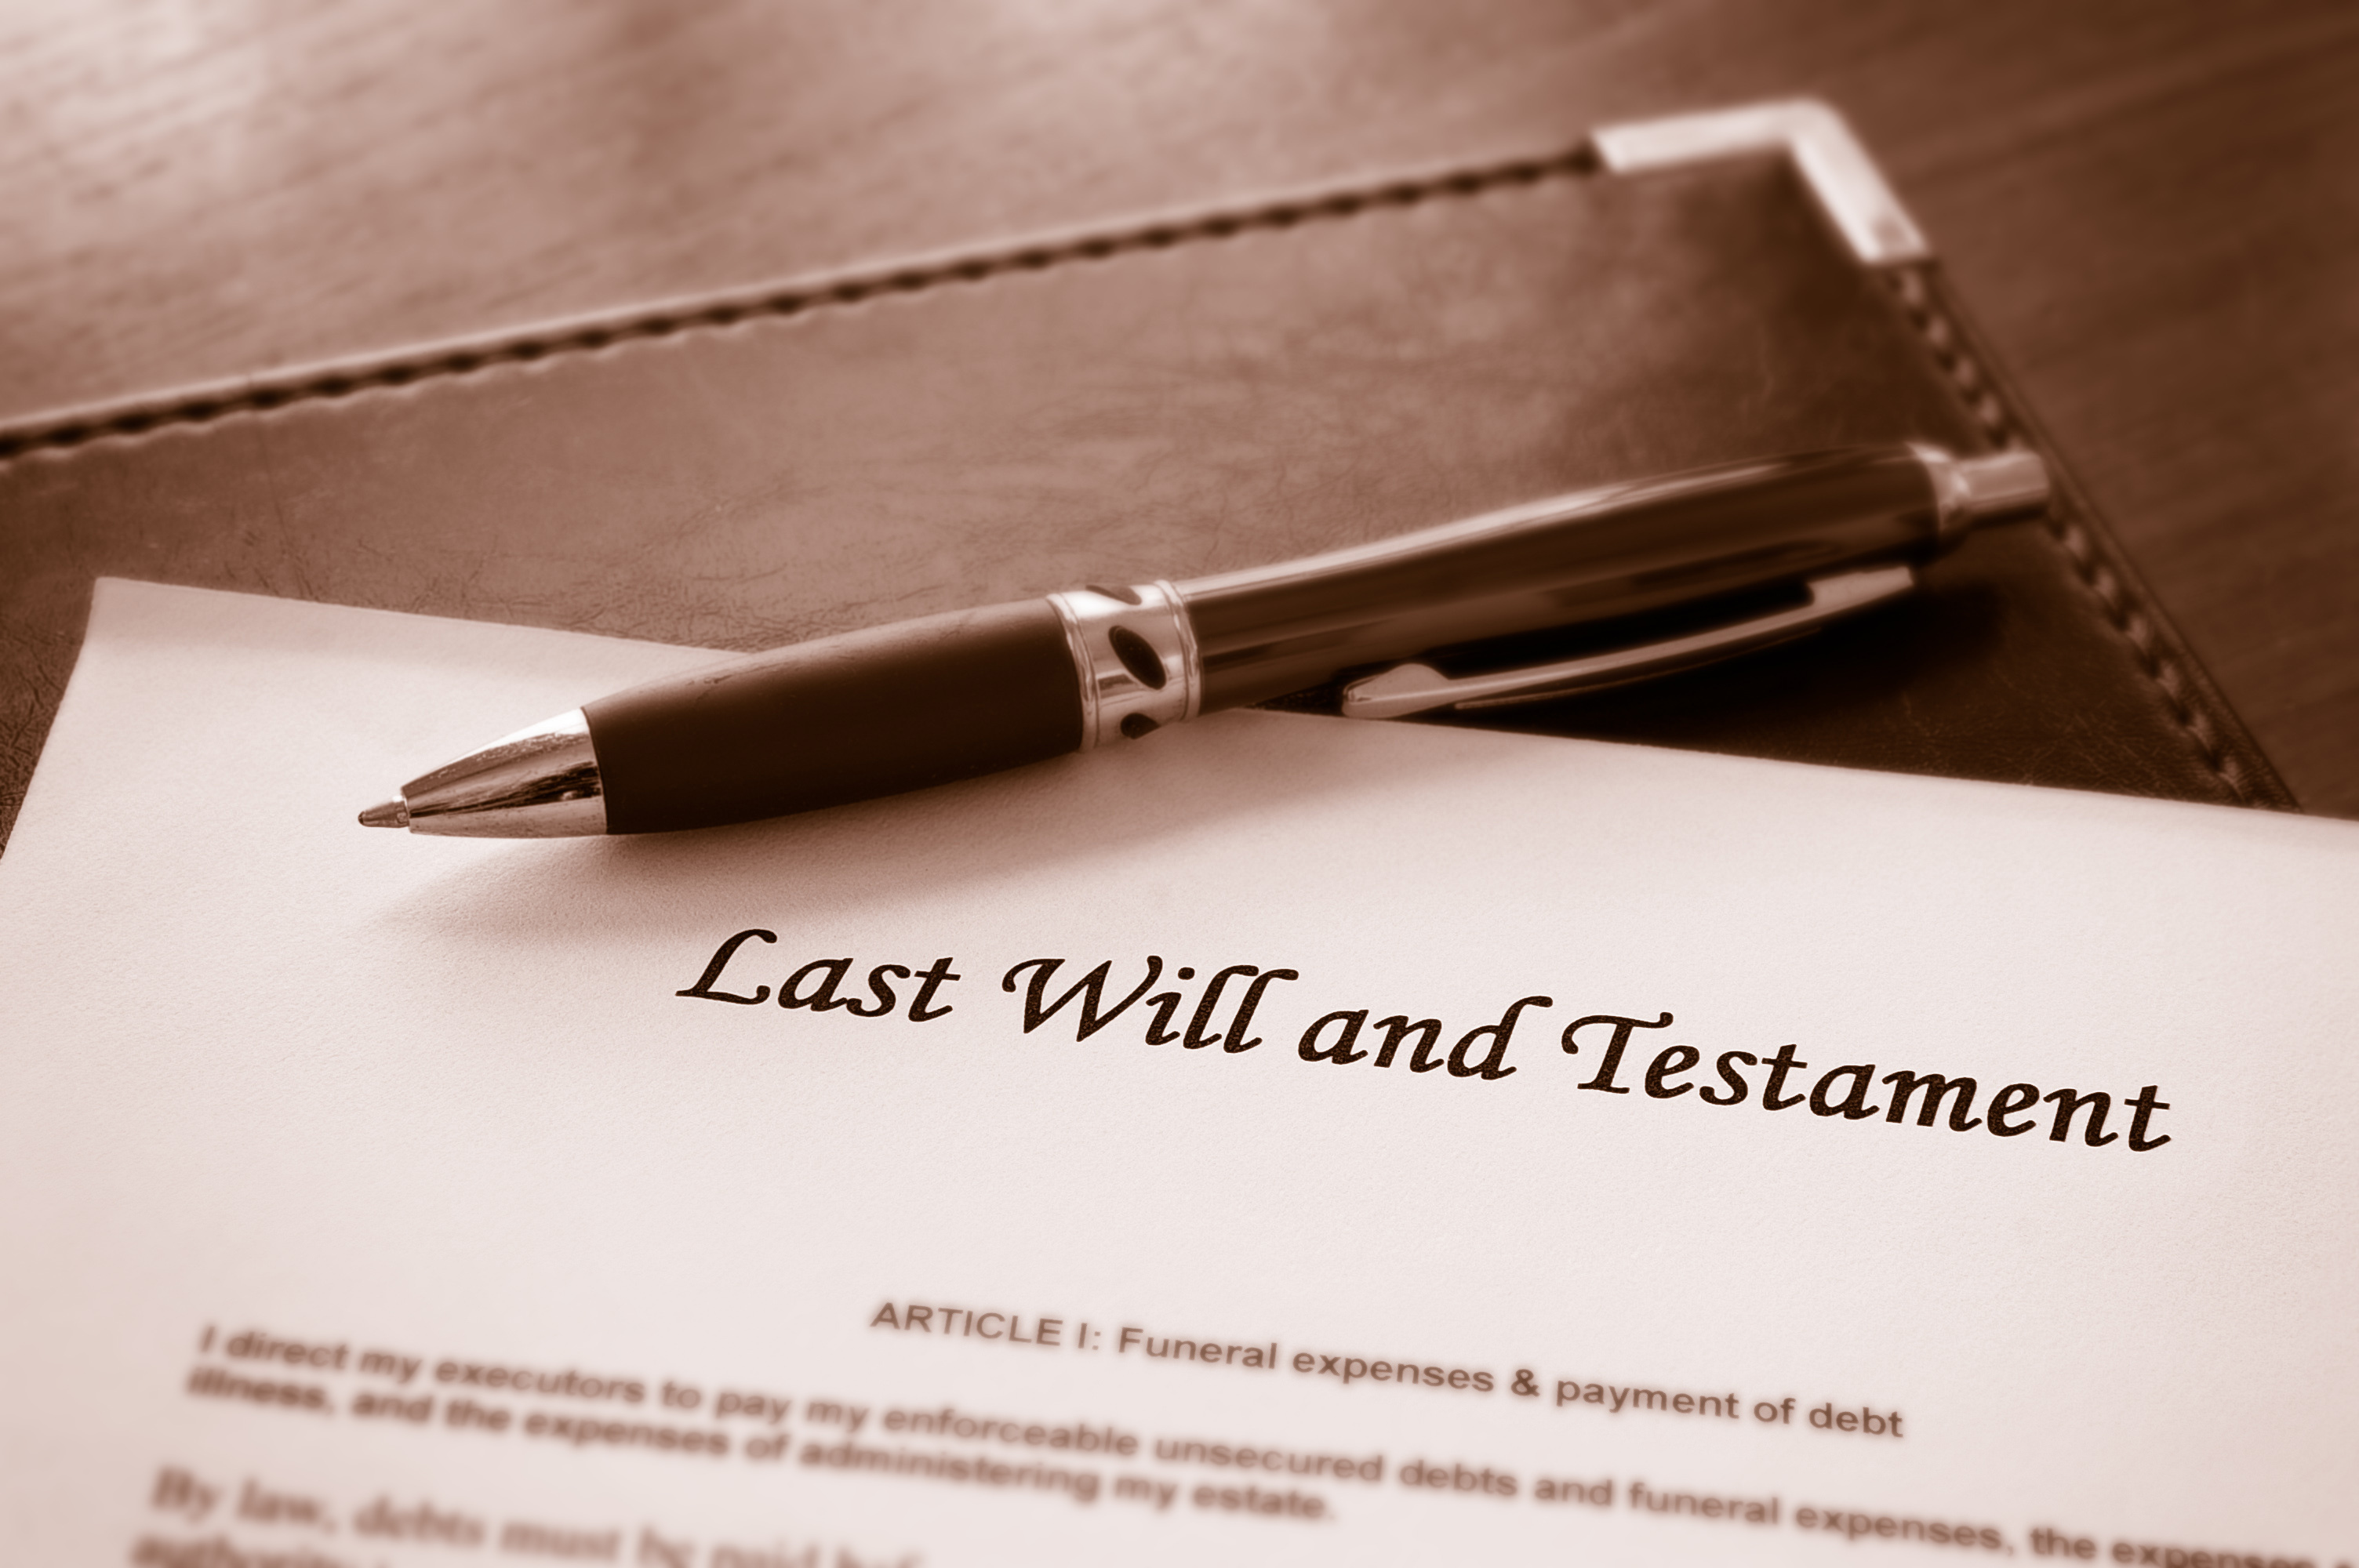 A document containing someone's last will and testament in writing | Source: Shutterstock